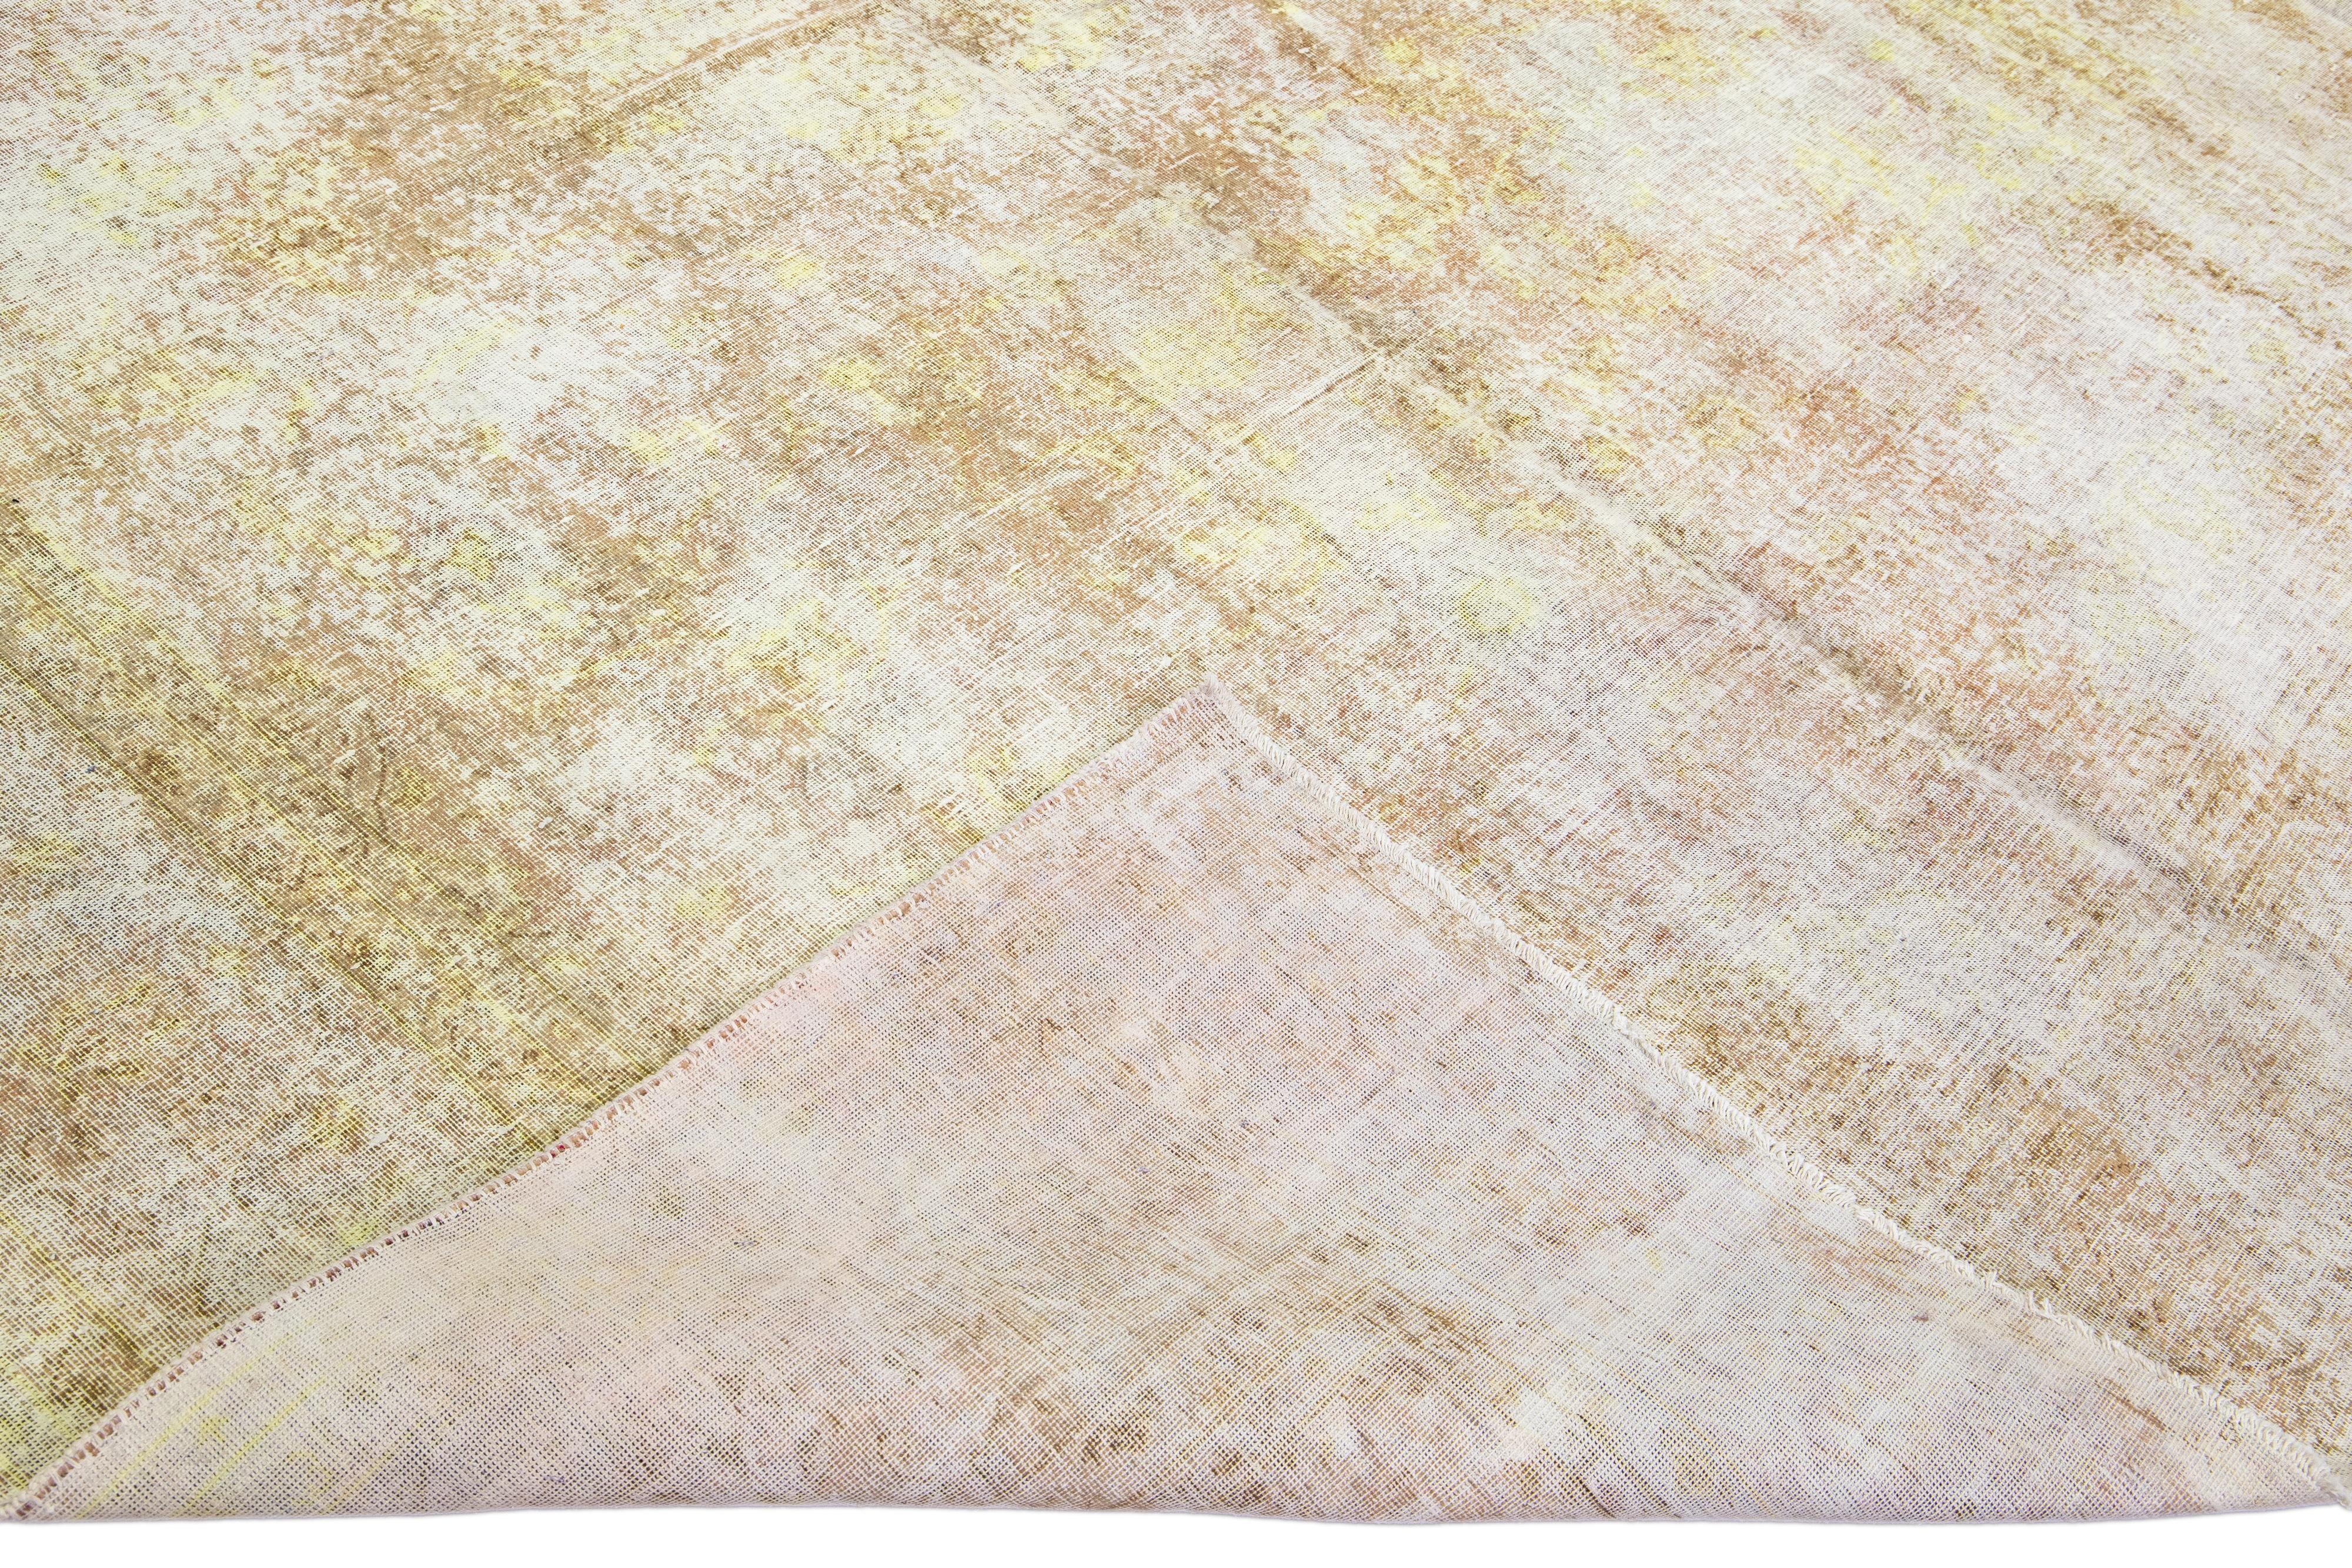 Beautiful vintage overdyed hand-knotted wool rug with a tan field. This overdyed rug has yellow and white accents in an all-over design.

This rug measures: 9'3'' x 11'9